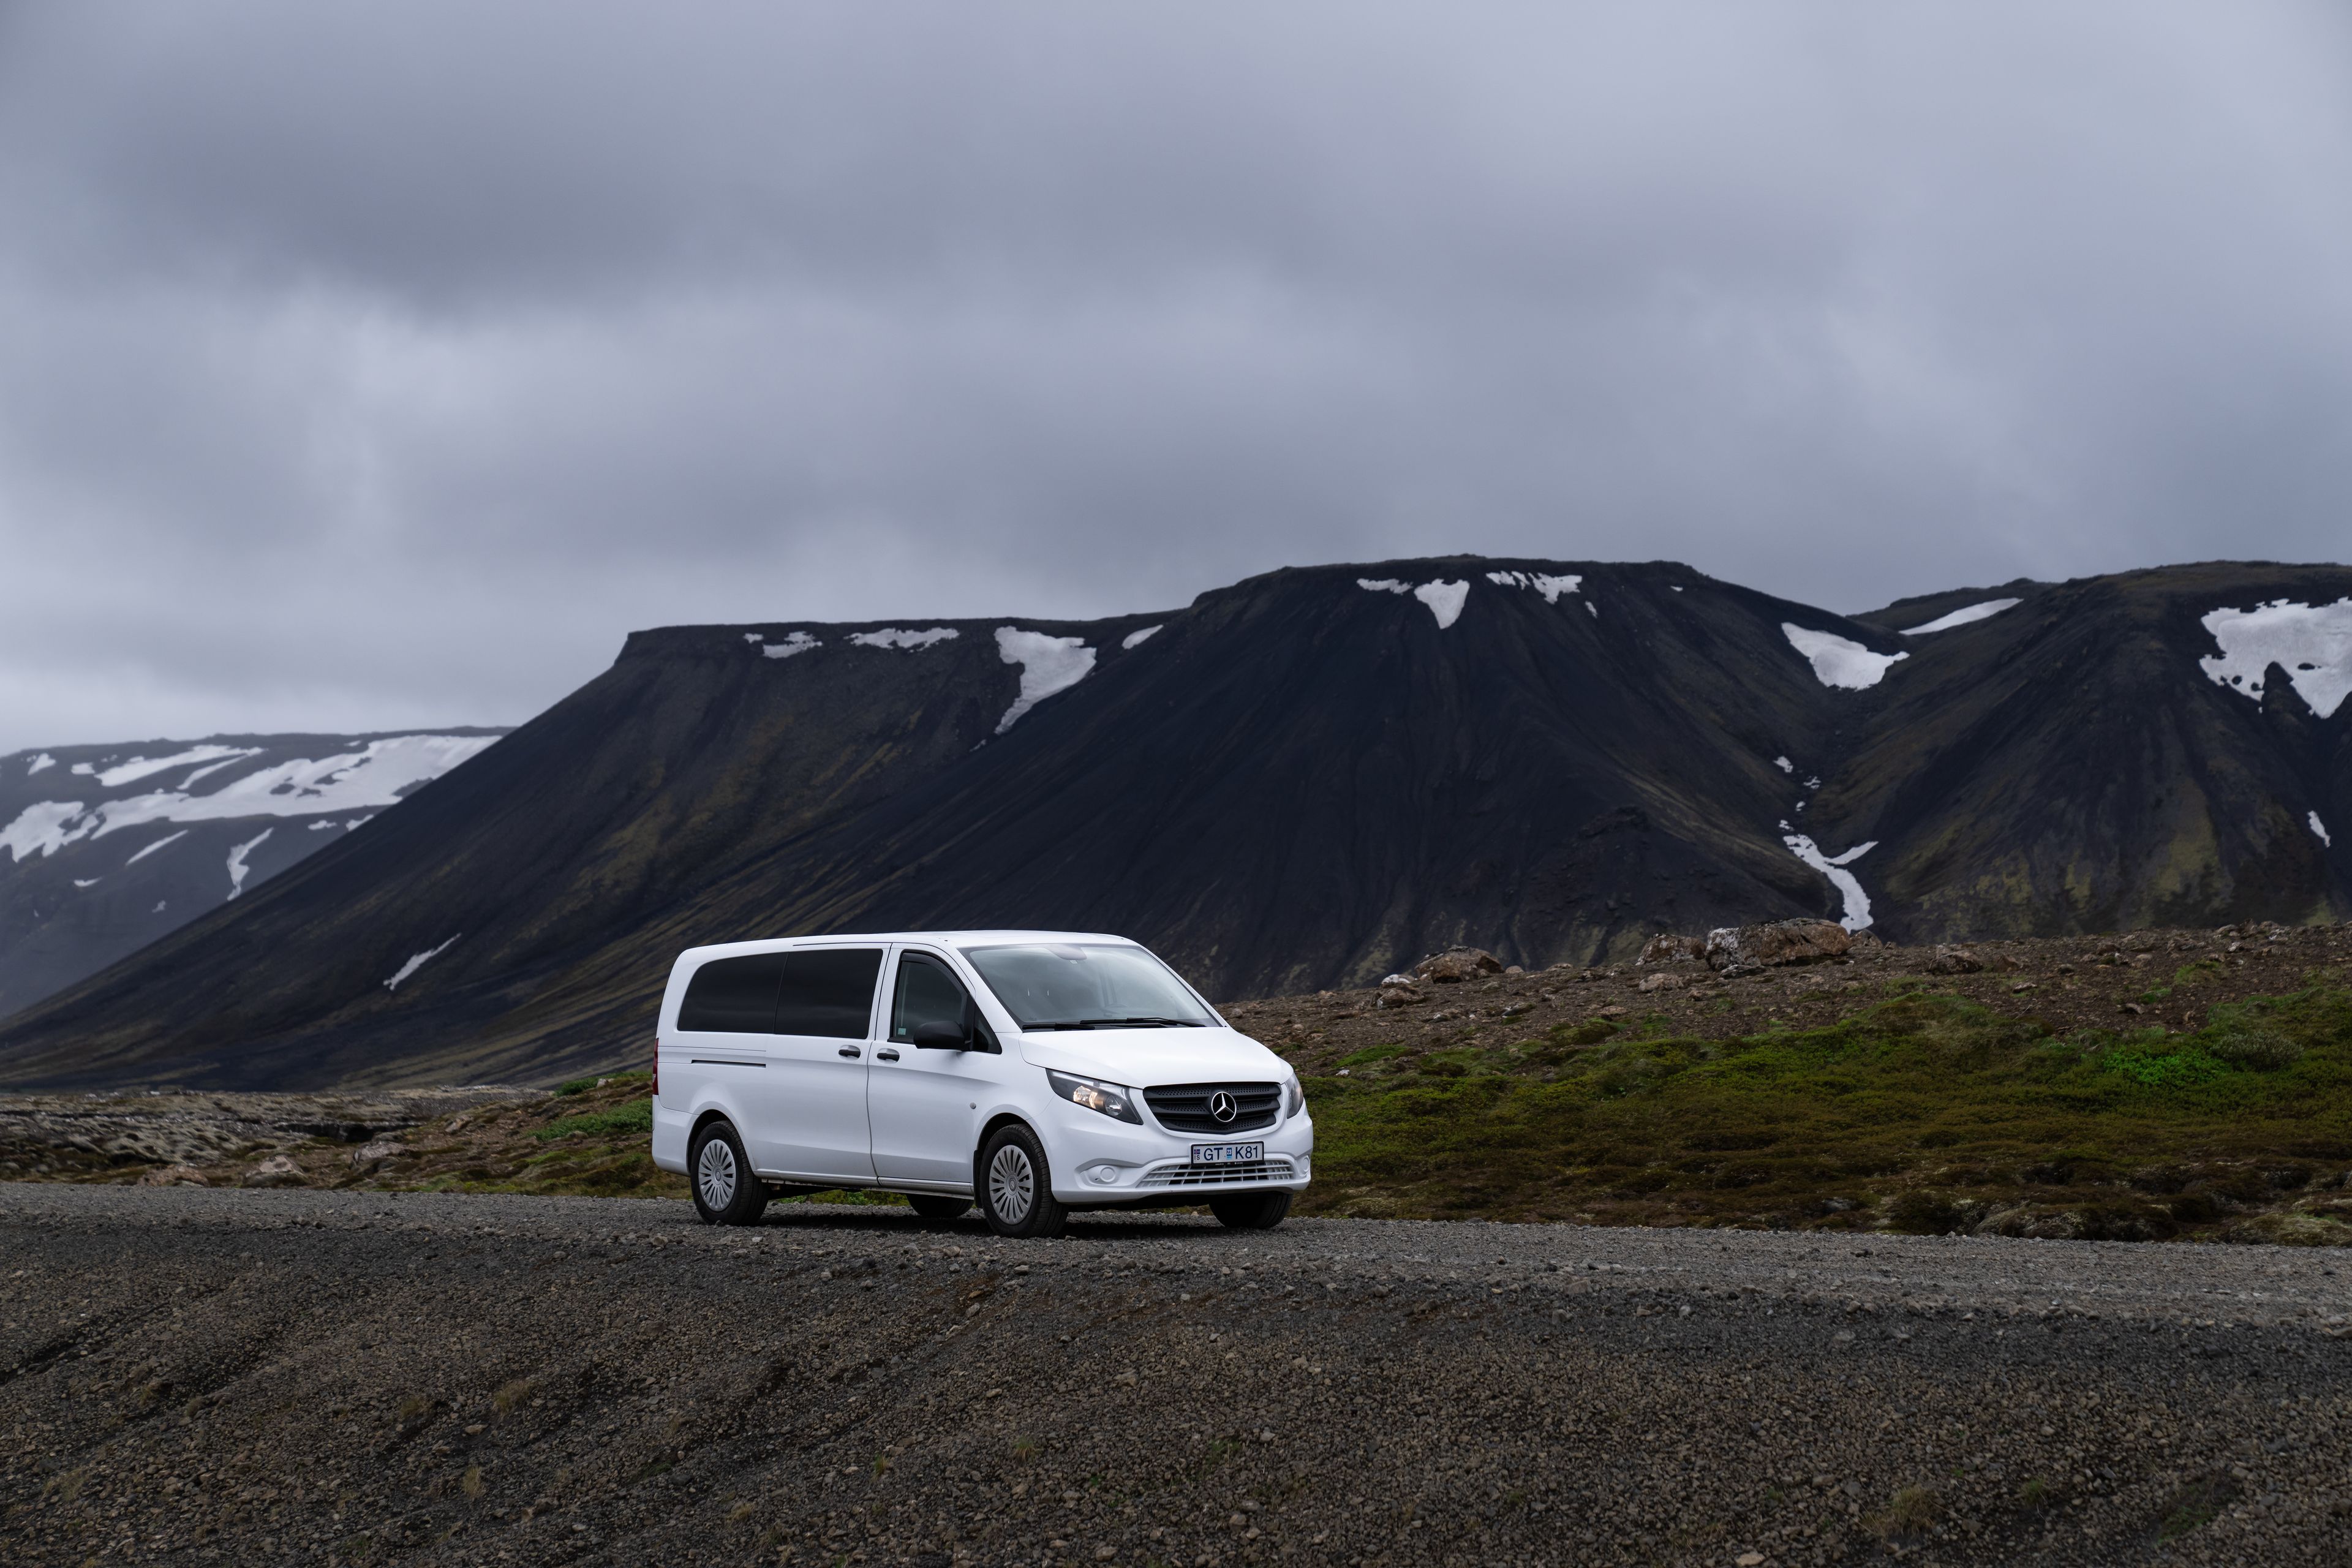 A luxurious Mercedes Benz Vito, a premium option for car hire in Iceland, parked amidst the picturesque Icelandic scenery